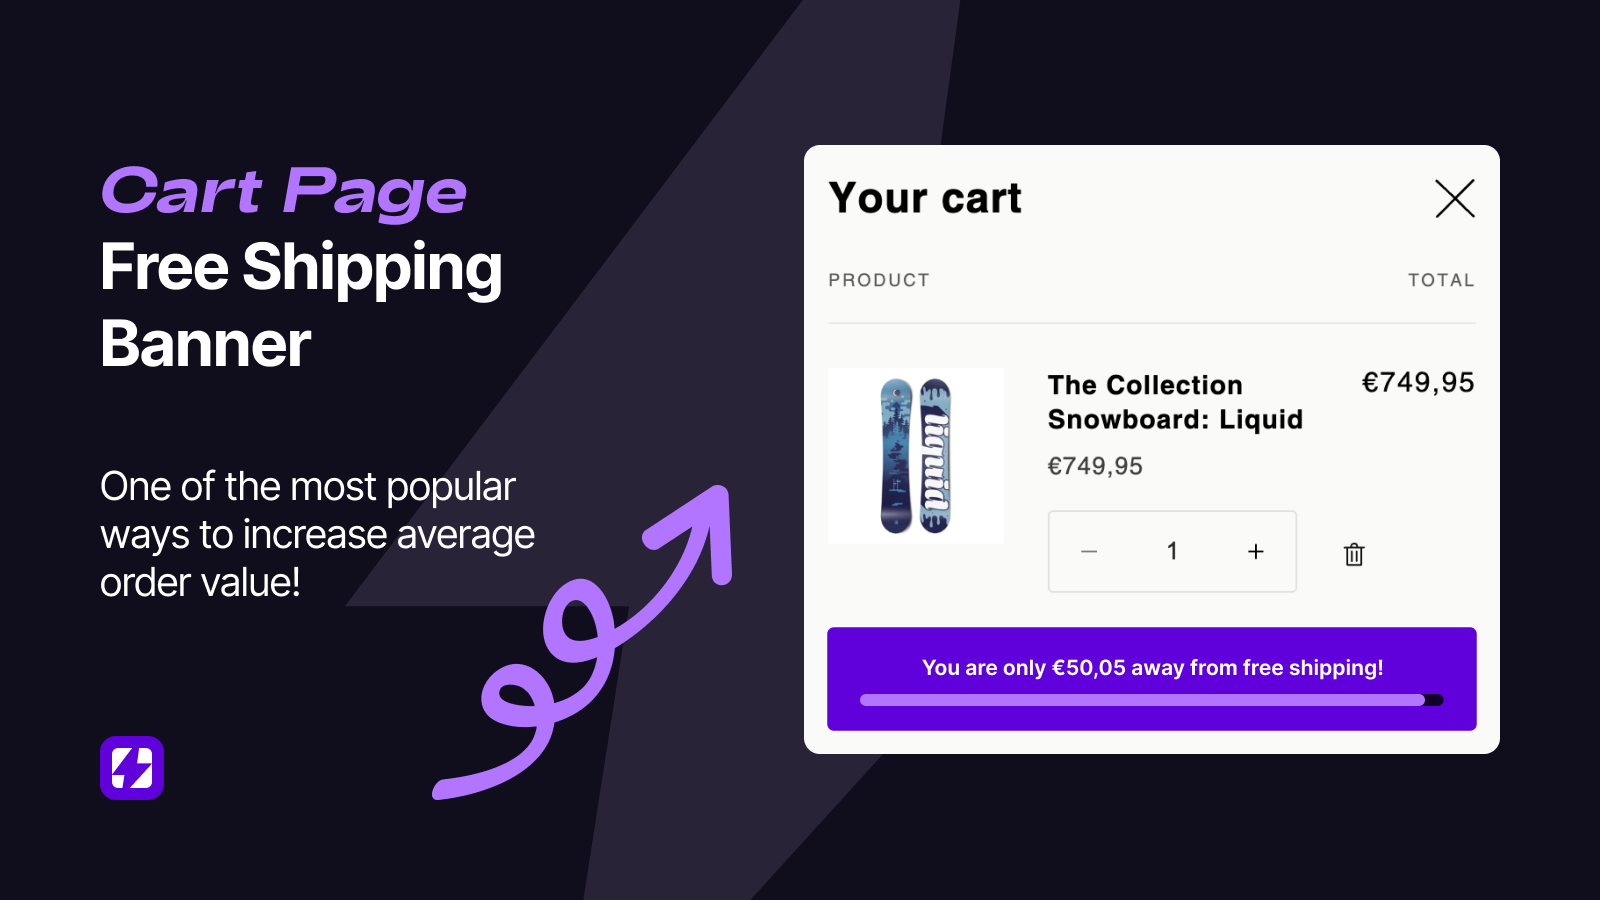 Cart Page - Free Shipping Banner